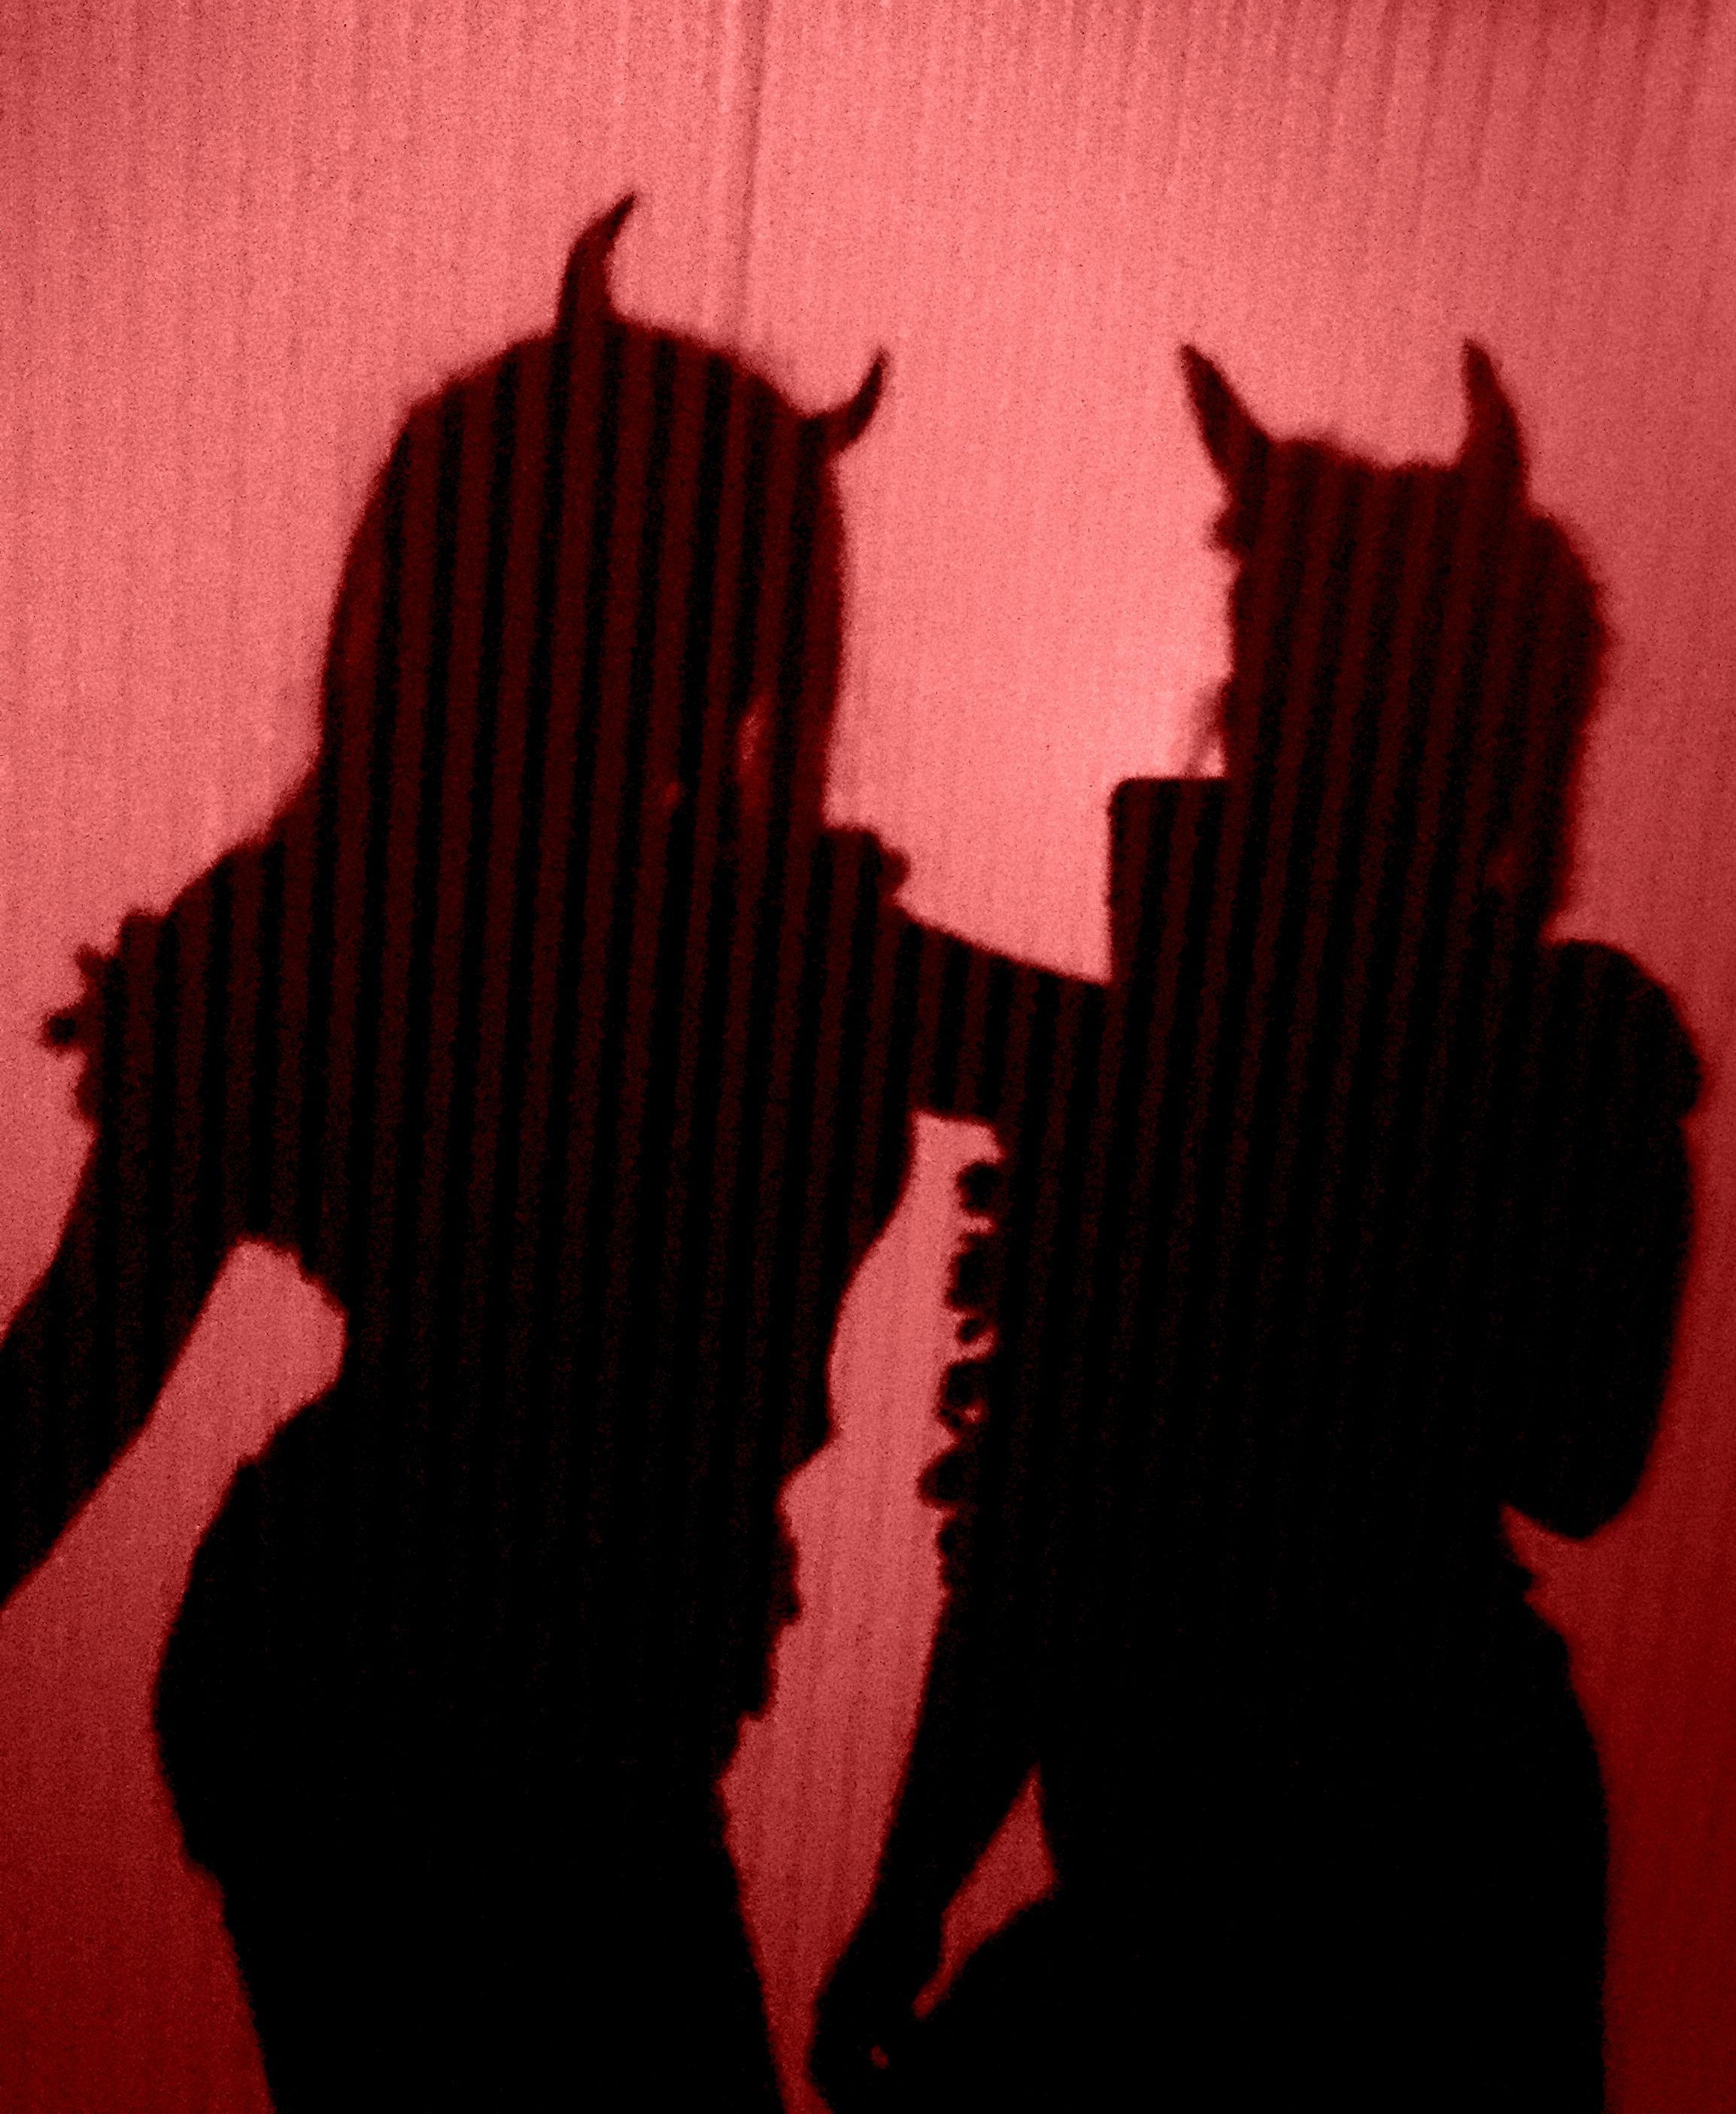 shadow ArT. Red aesthetic grunge, Red aesthetic, Shadow art